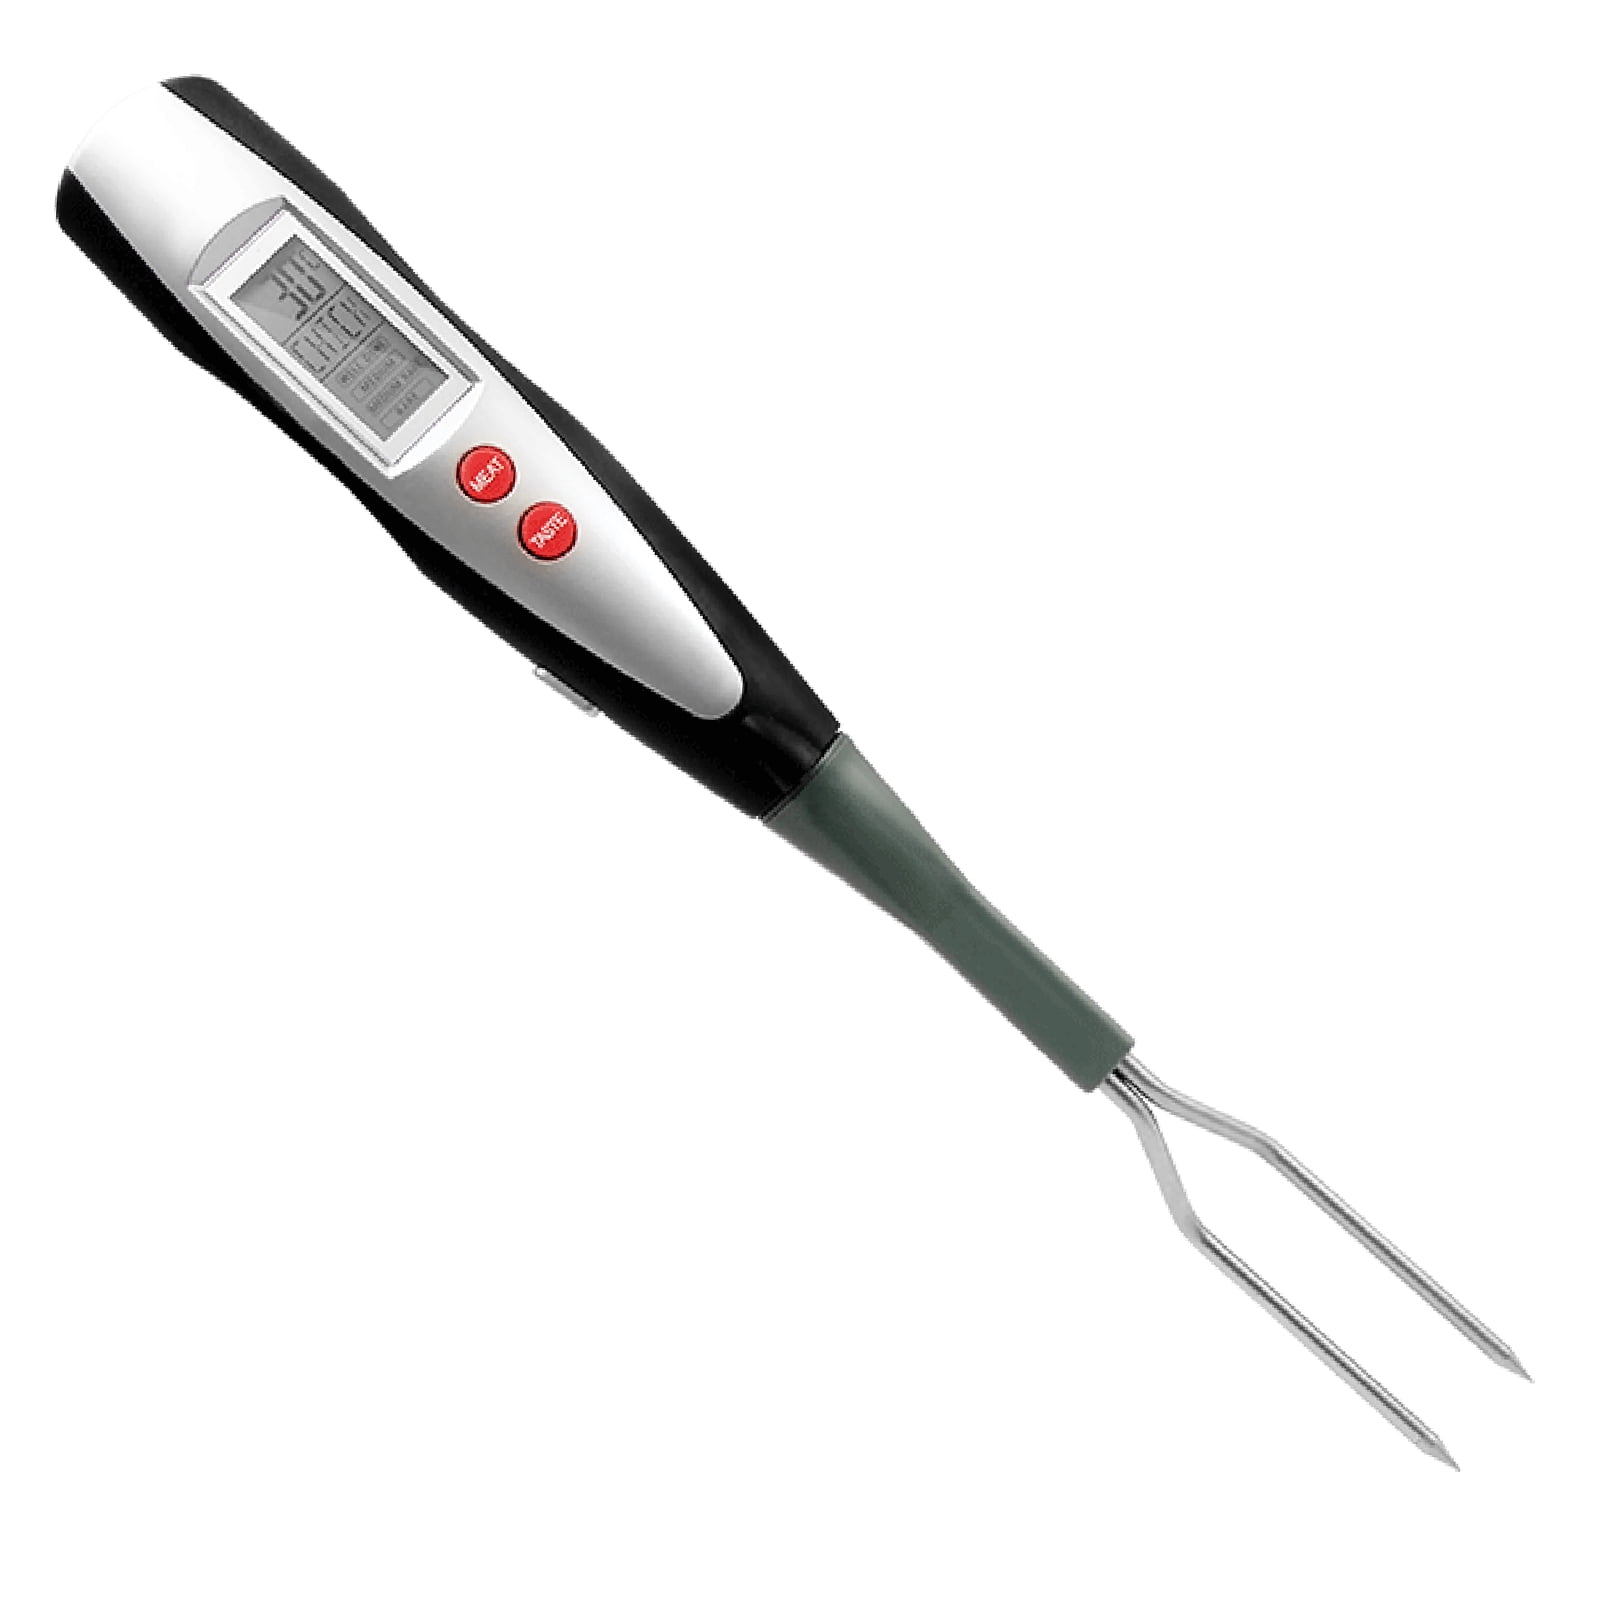 Barbecue & Home Kitchen 41 x 4.2 x 2.8 cm Gourmia GTH9170 Digital Meat Fork Thermometer Perfect for Grilling 